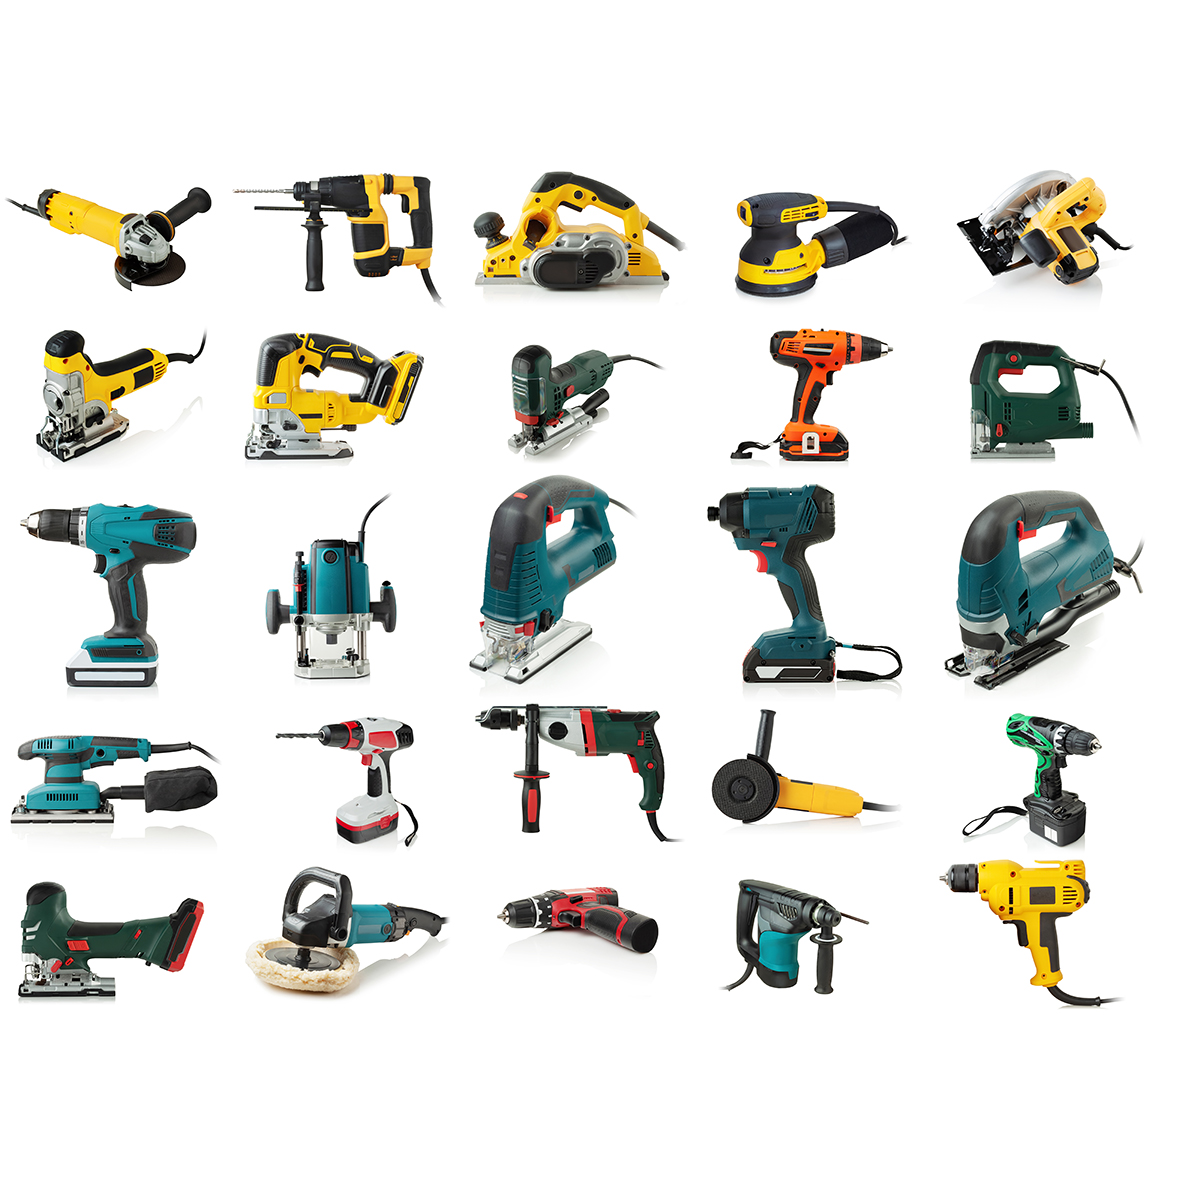 fathers-day-gift-guide/images/Power-Tools-partsavatar-canada.jpeg